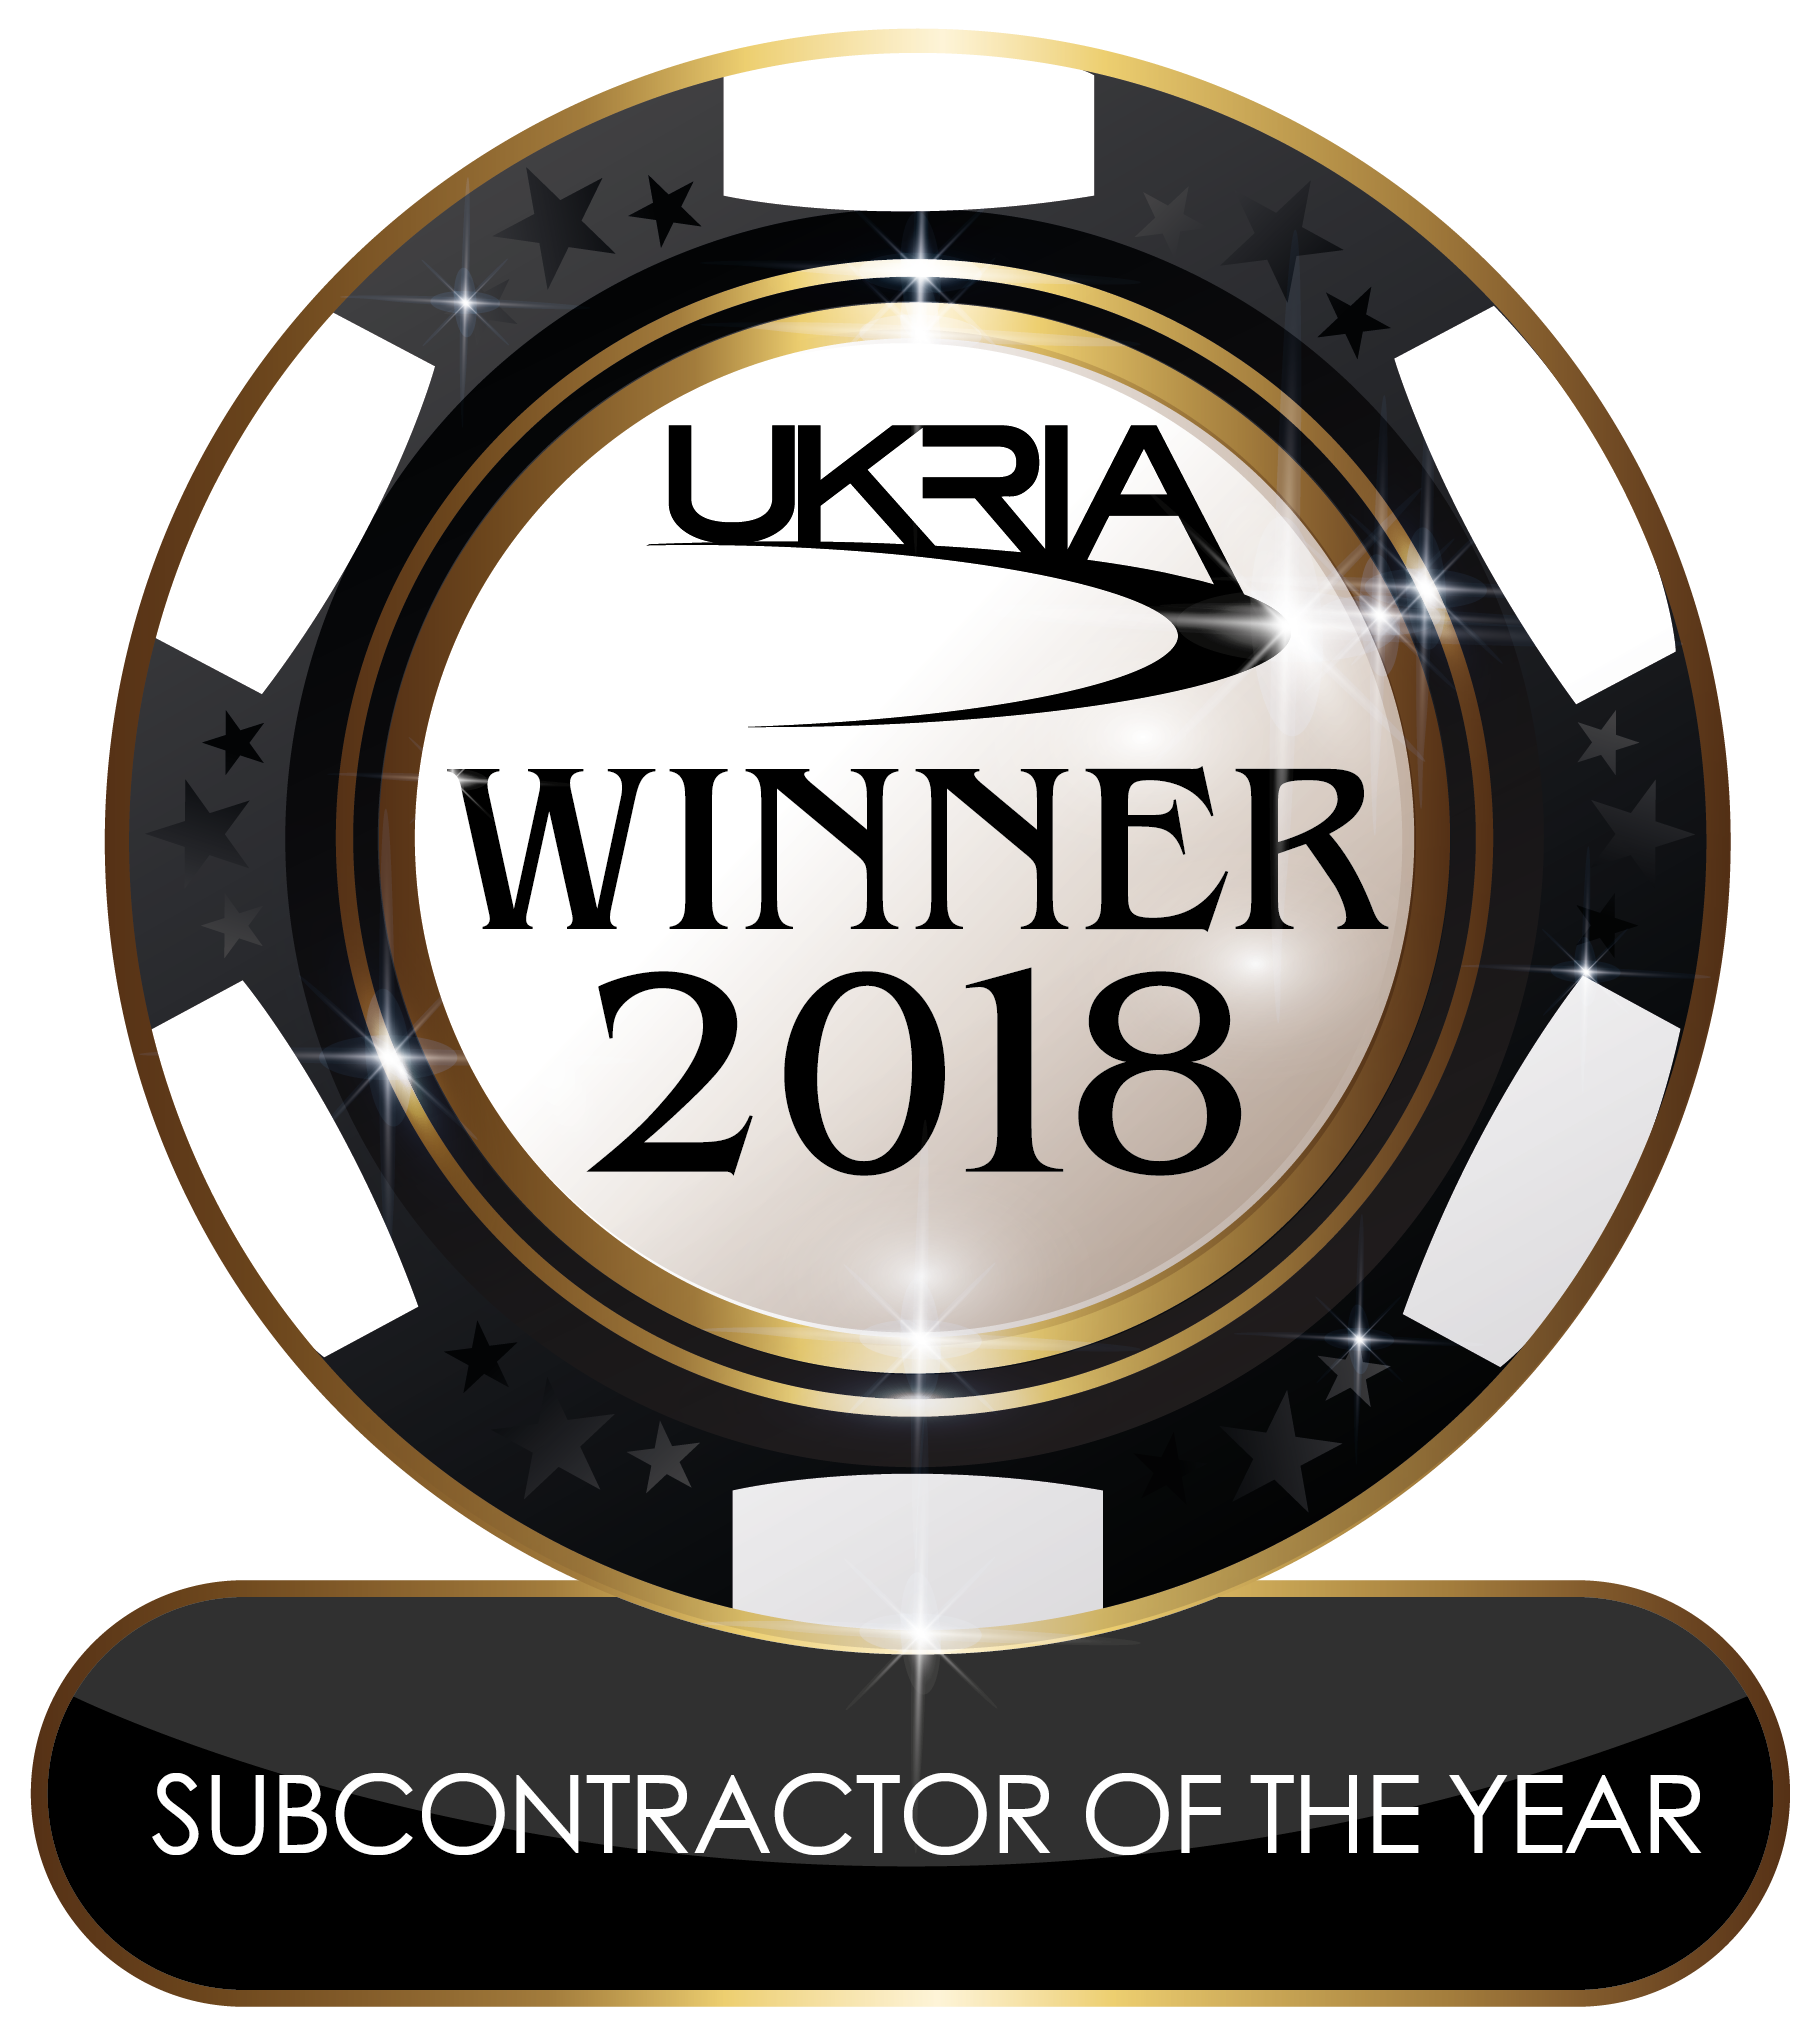 UK RIA Subcontractor Of The Year Winner Award Certificate 2018